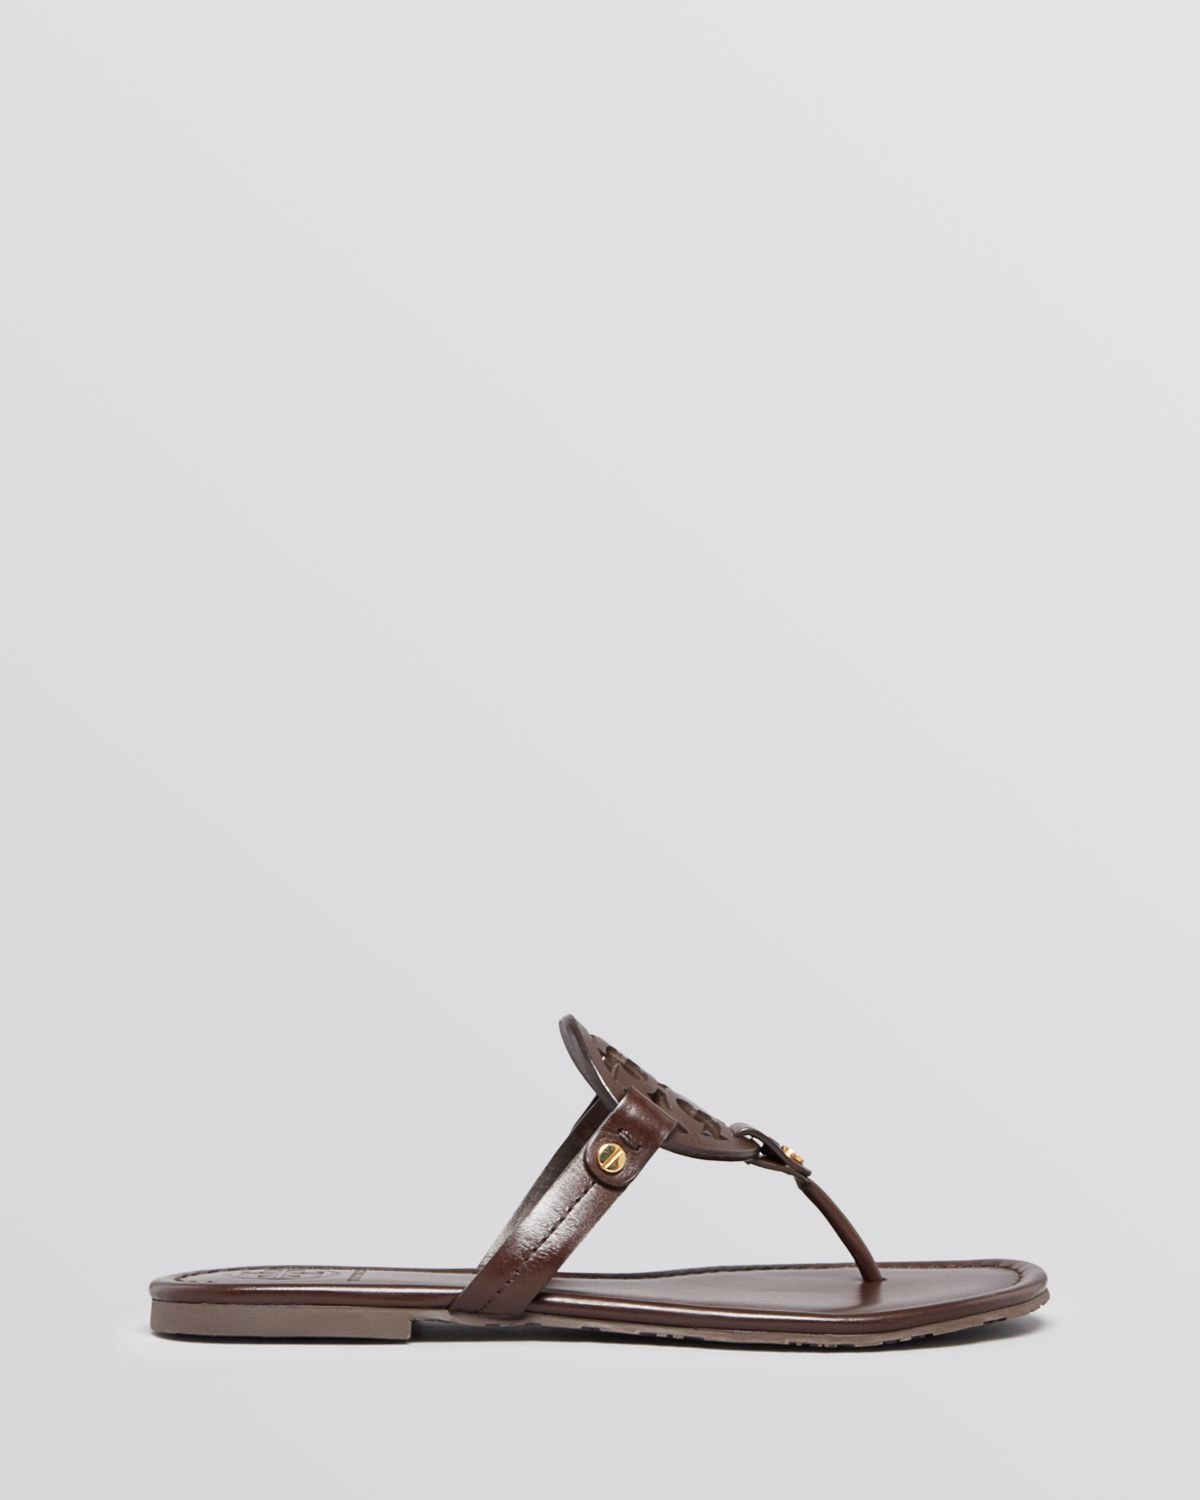 Lyst - Tory Burch Flat Thong Sandals - Miller2 in Brown